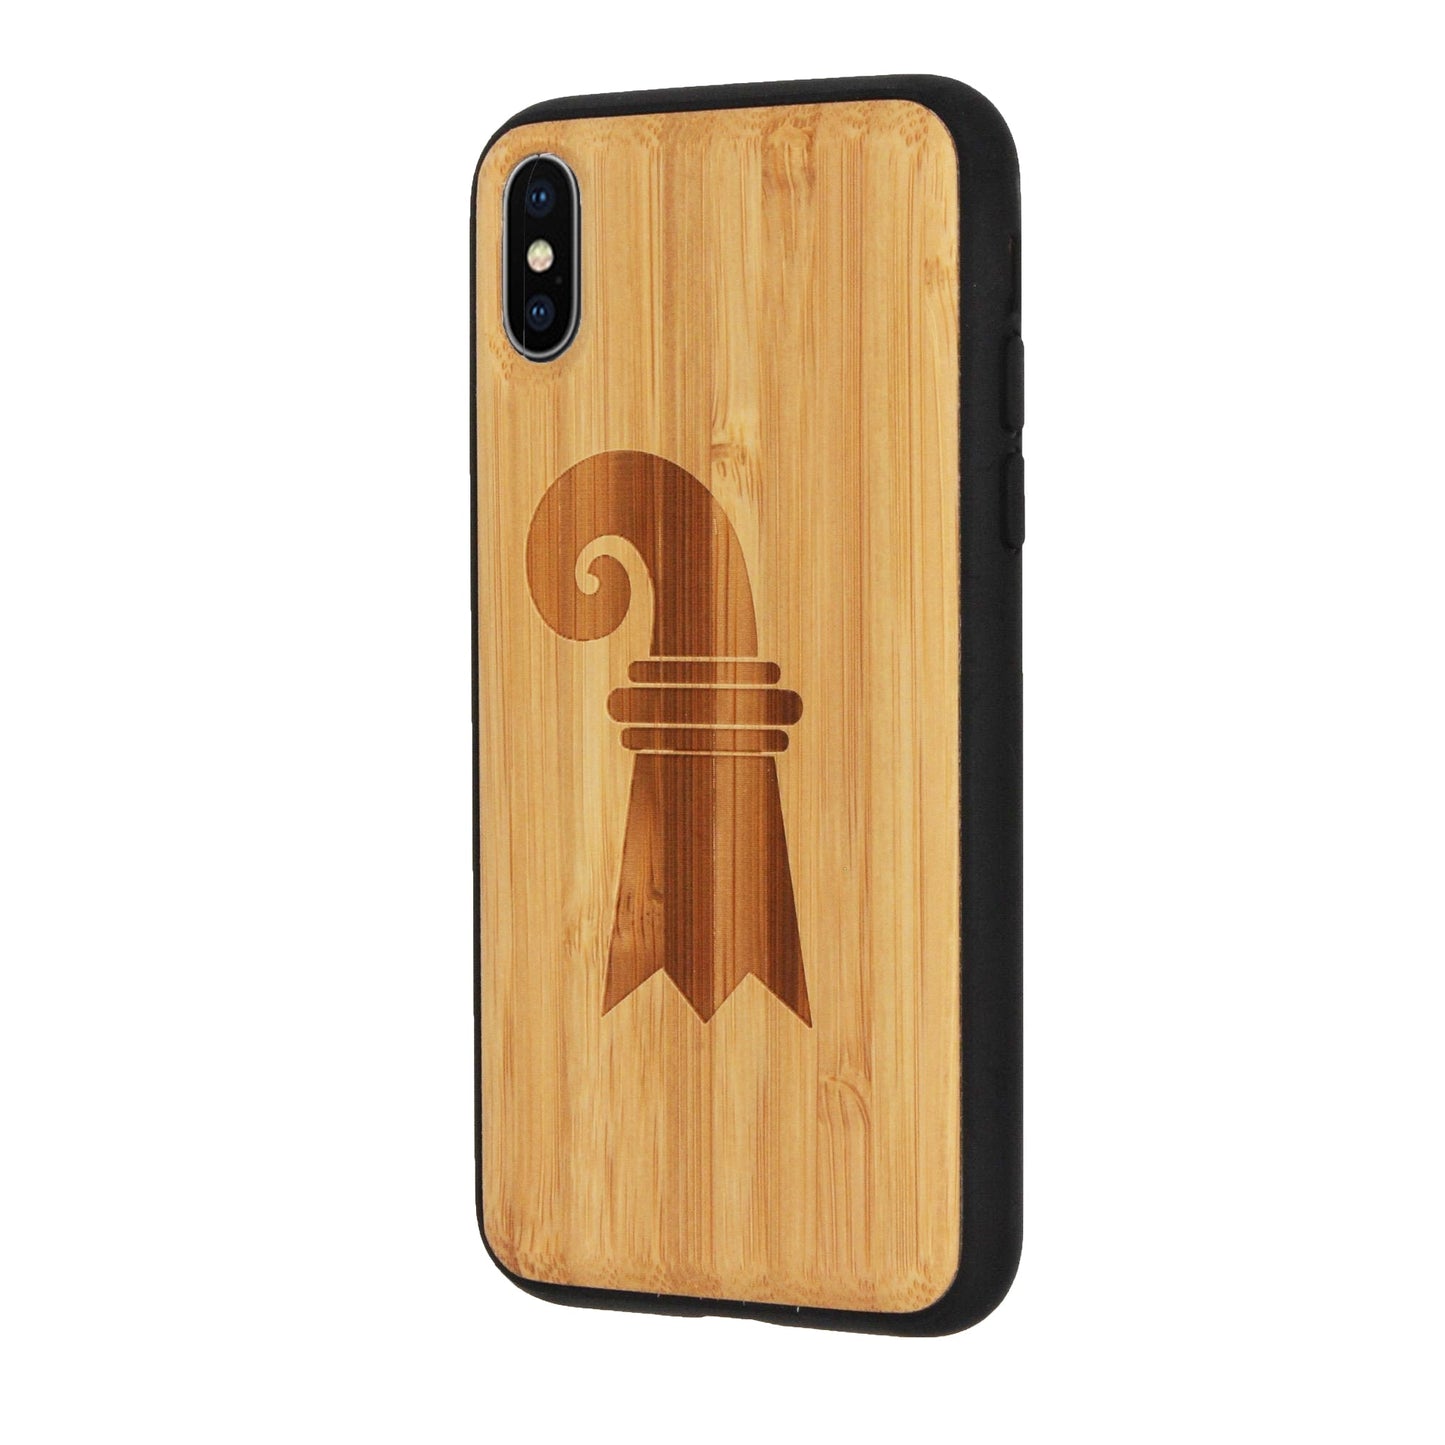 Baslerstab Eden case made of bamboo for iPhone XS Max